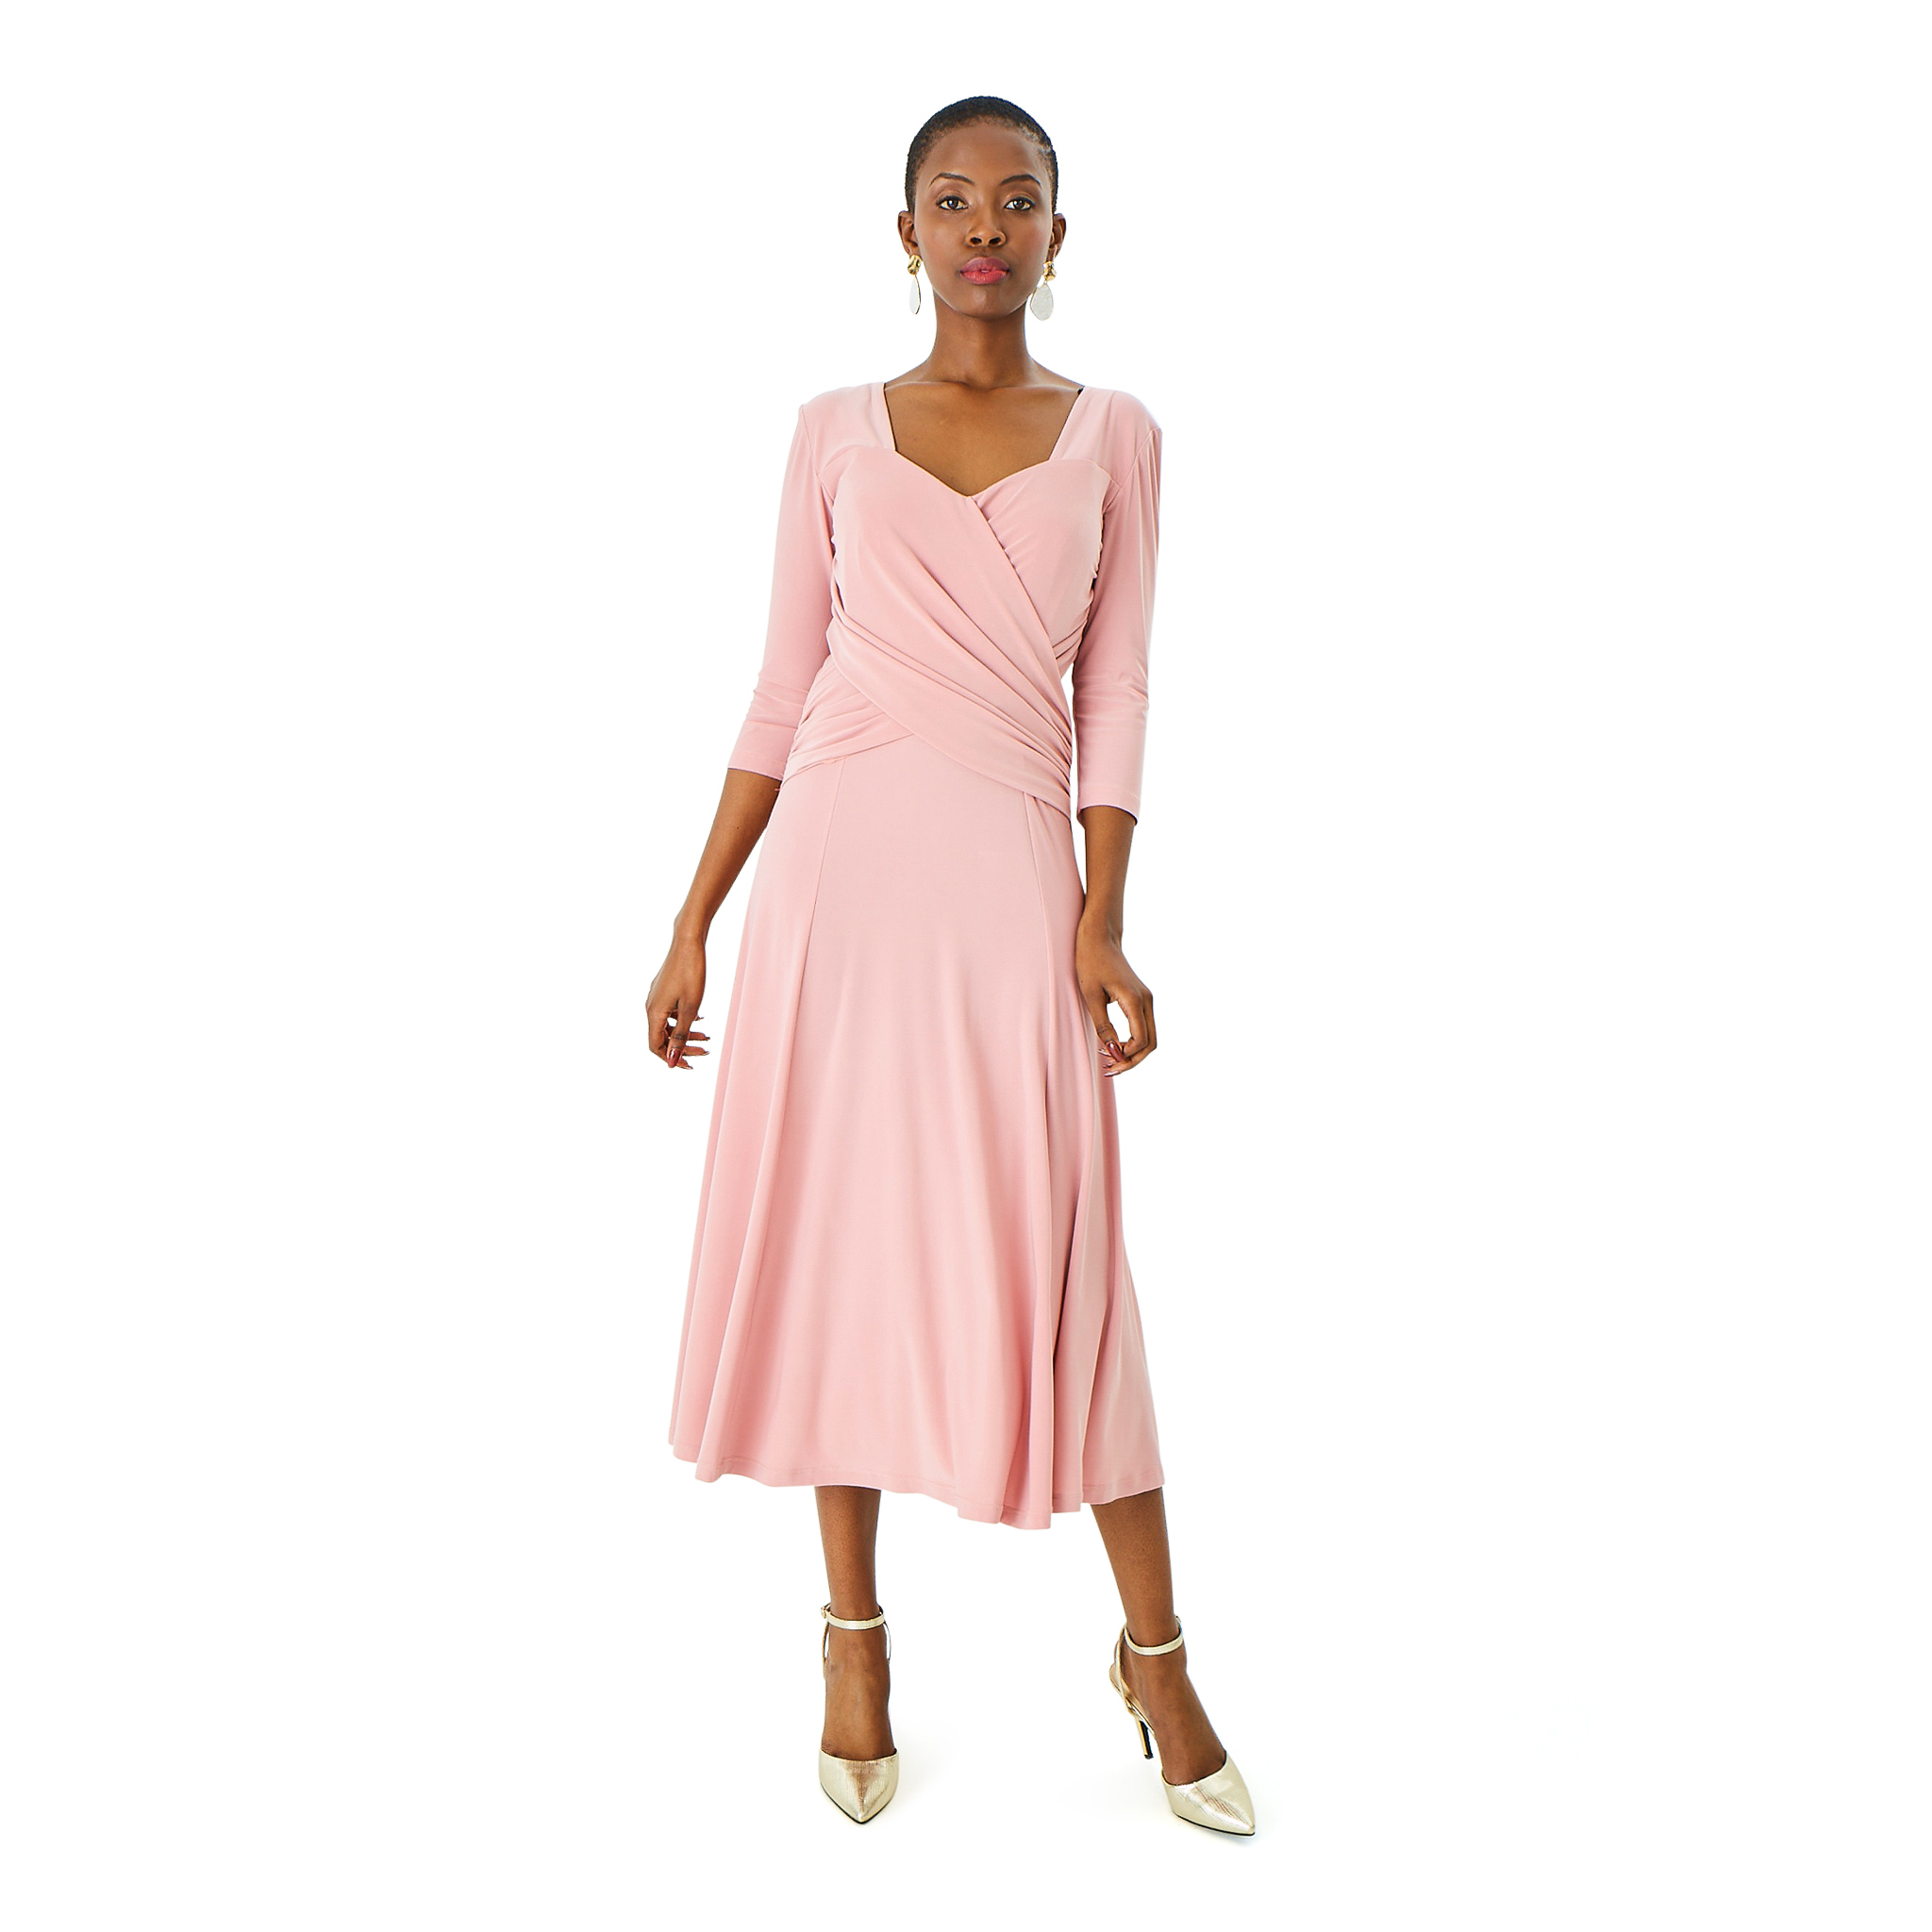 HIP HOP DUSTY PINK CROSS OVER VALA DRESS | Rosella - Style inspired by ...